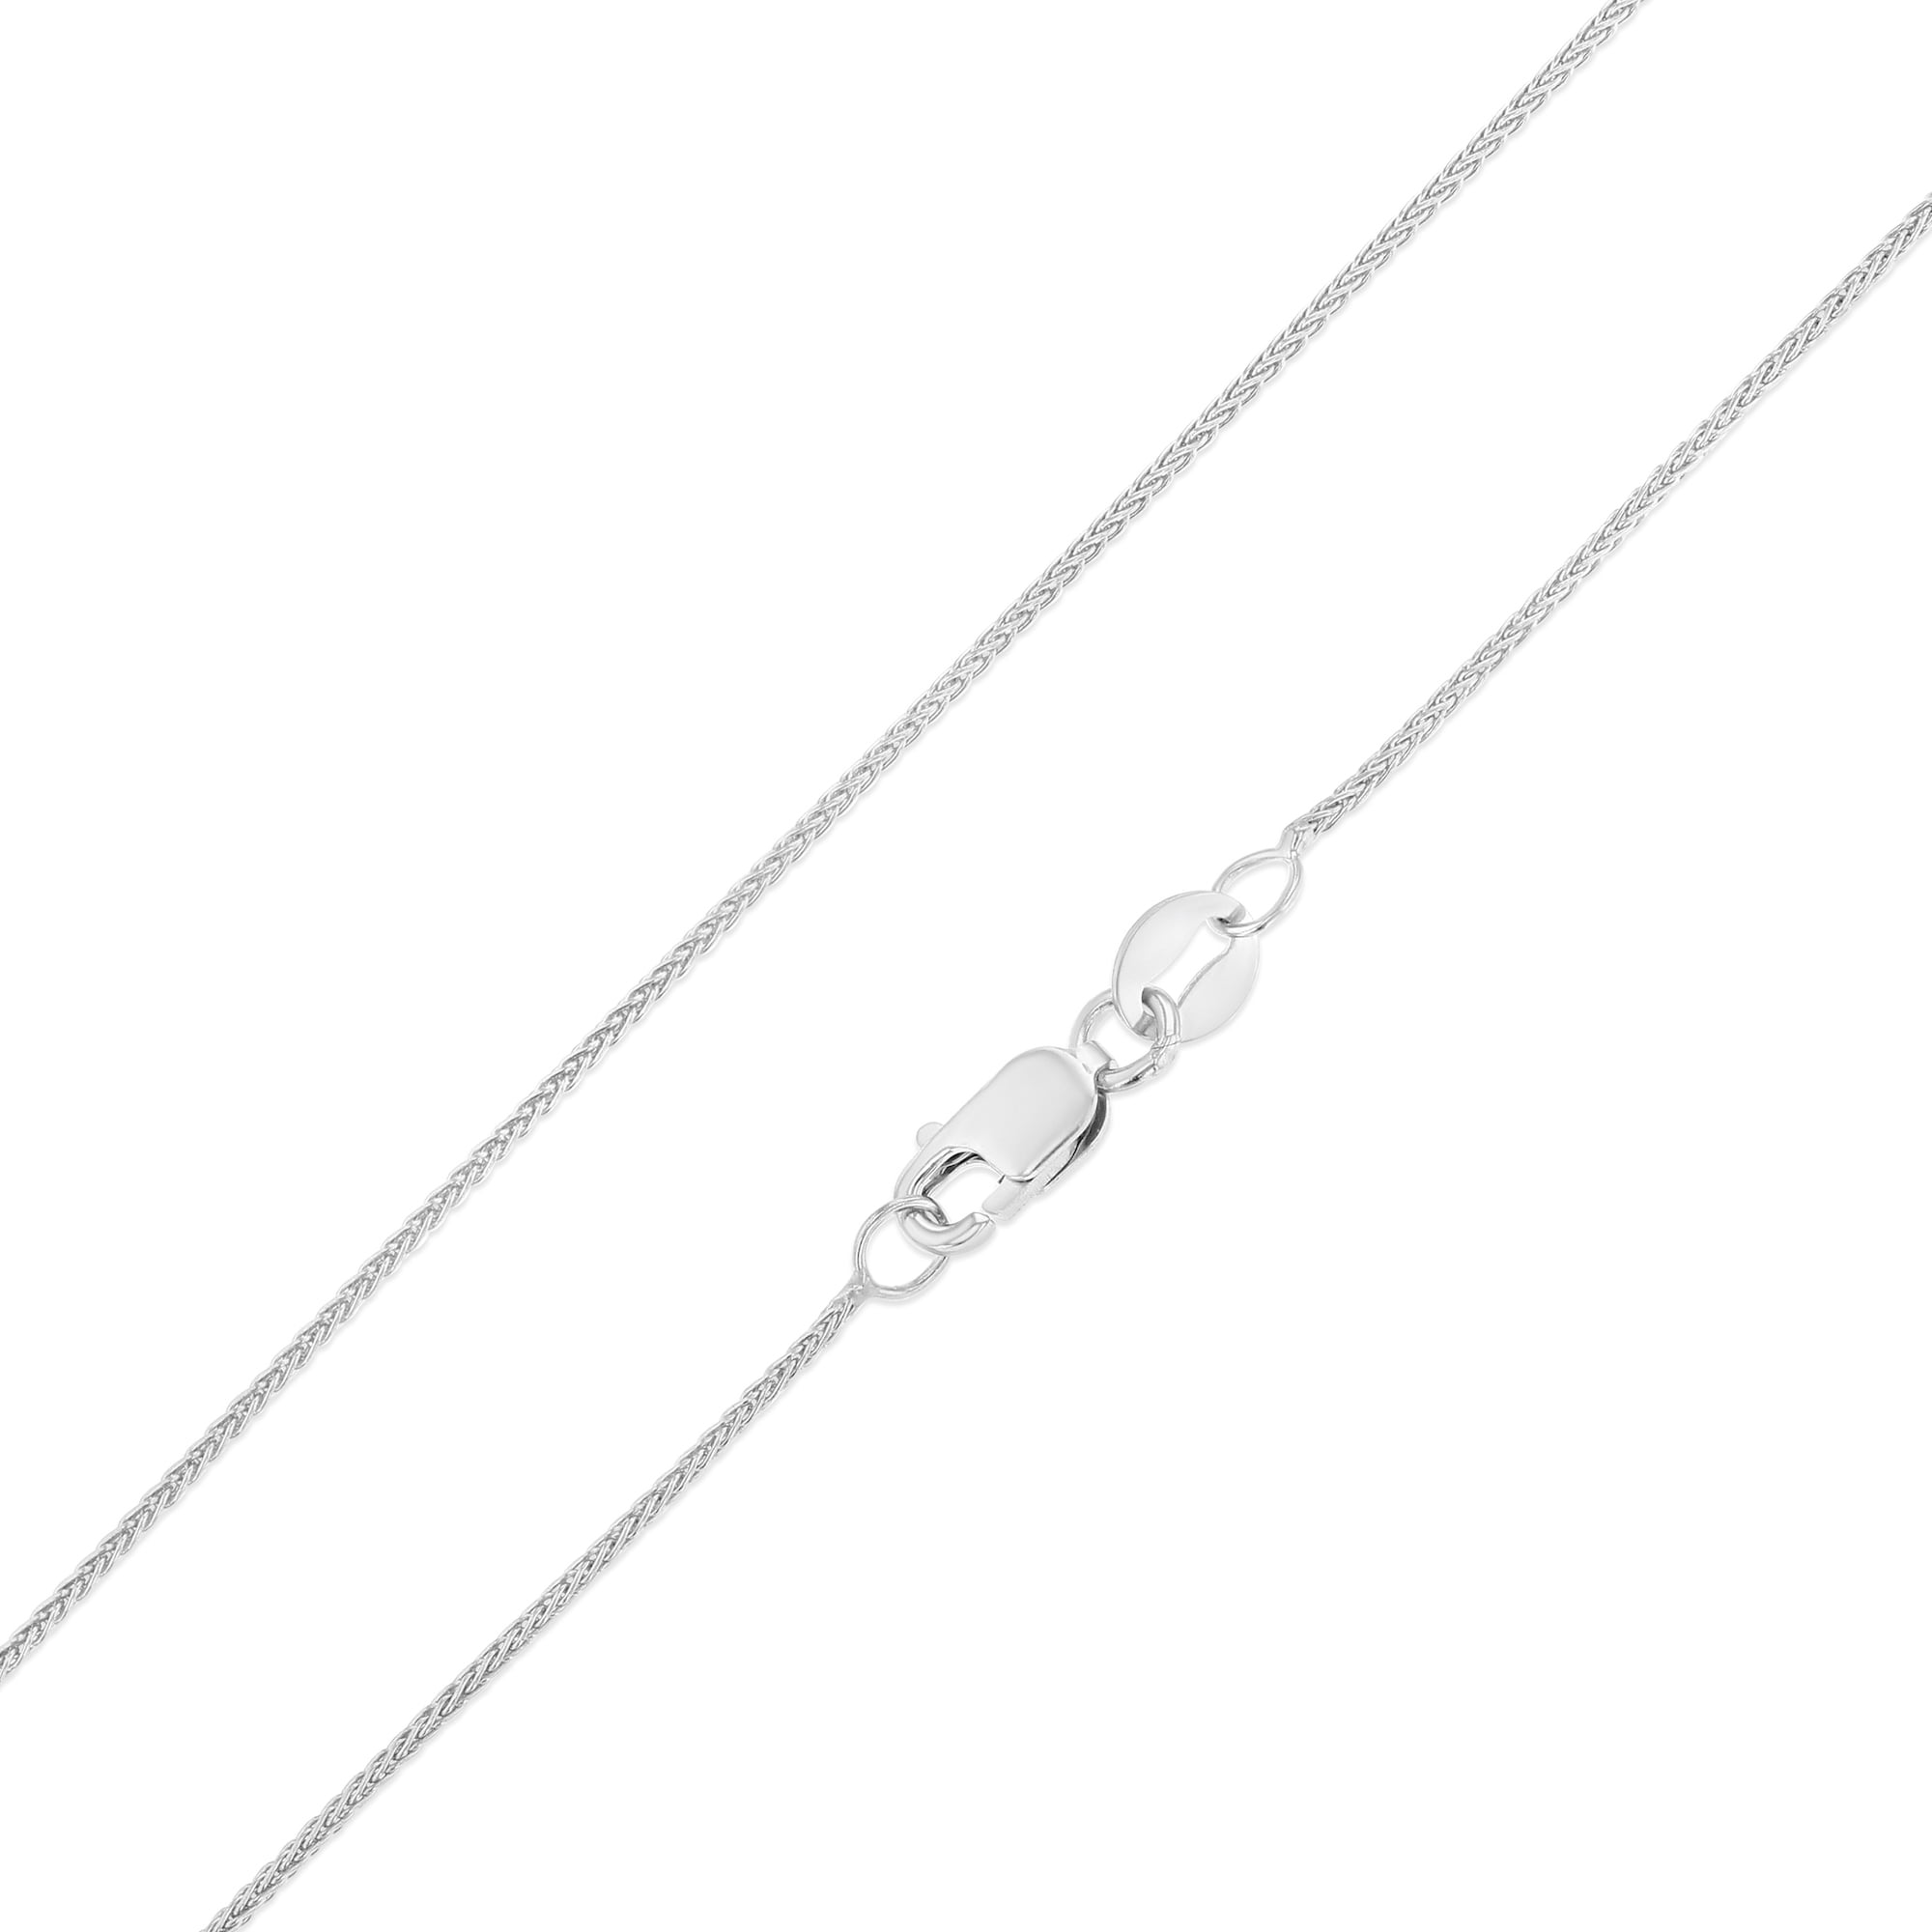 Lex & Lu 14k Yellow Gold 1.6mm Solid D/C Rope Chain Necklace or Bracelet